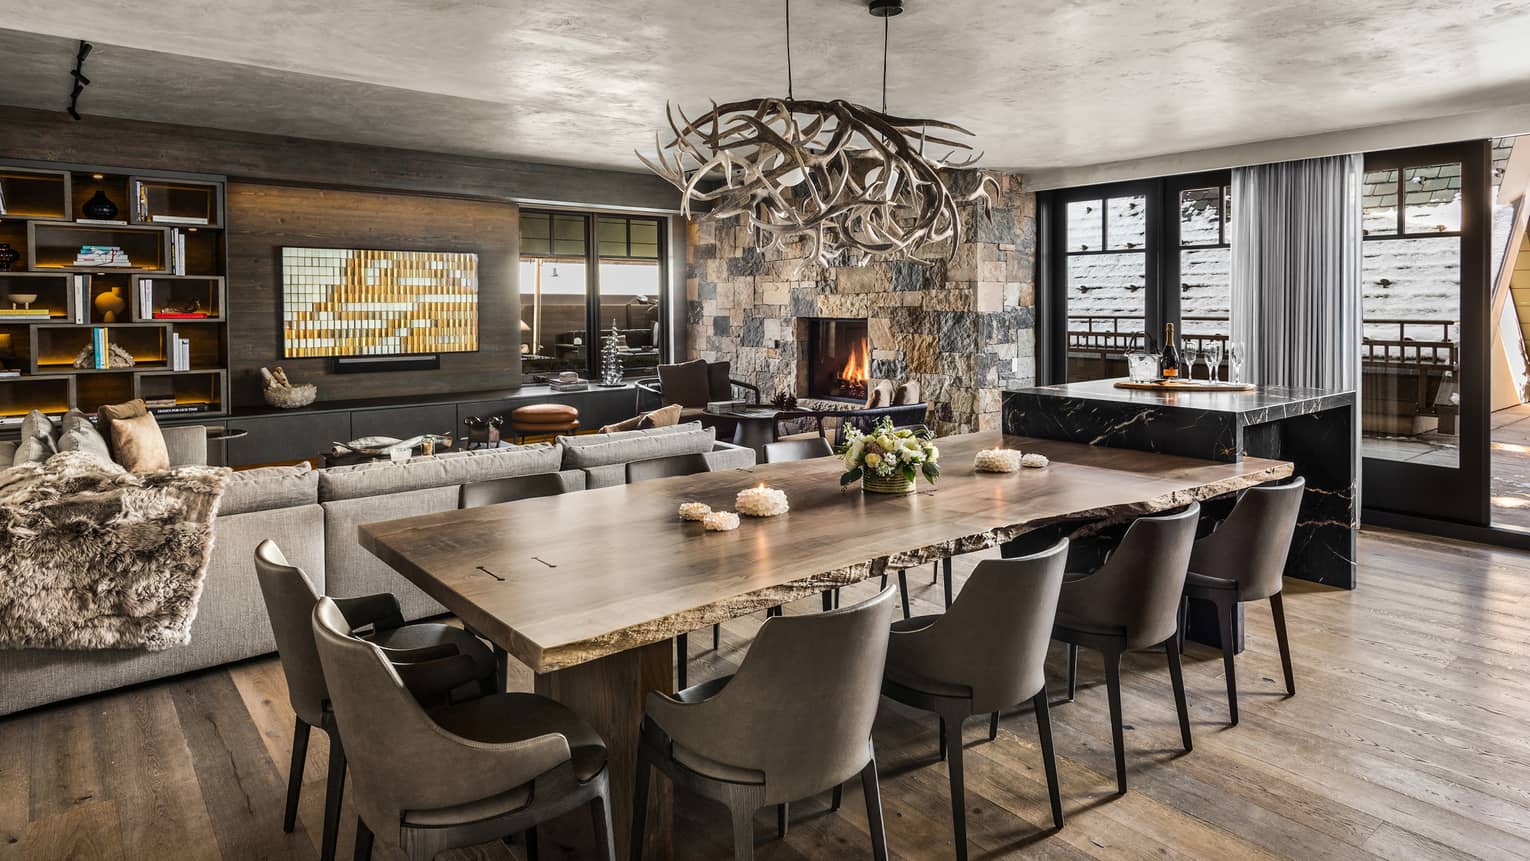 Mountain-chic dining area with wooden floors, dining table and ten leather chairs, antler chandelier